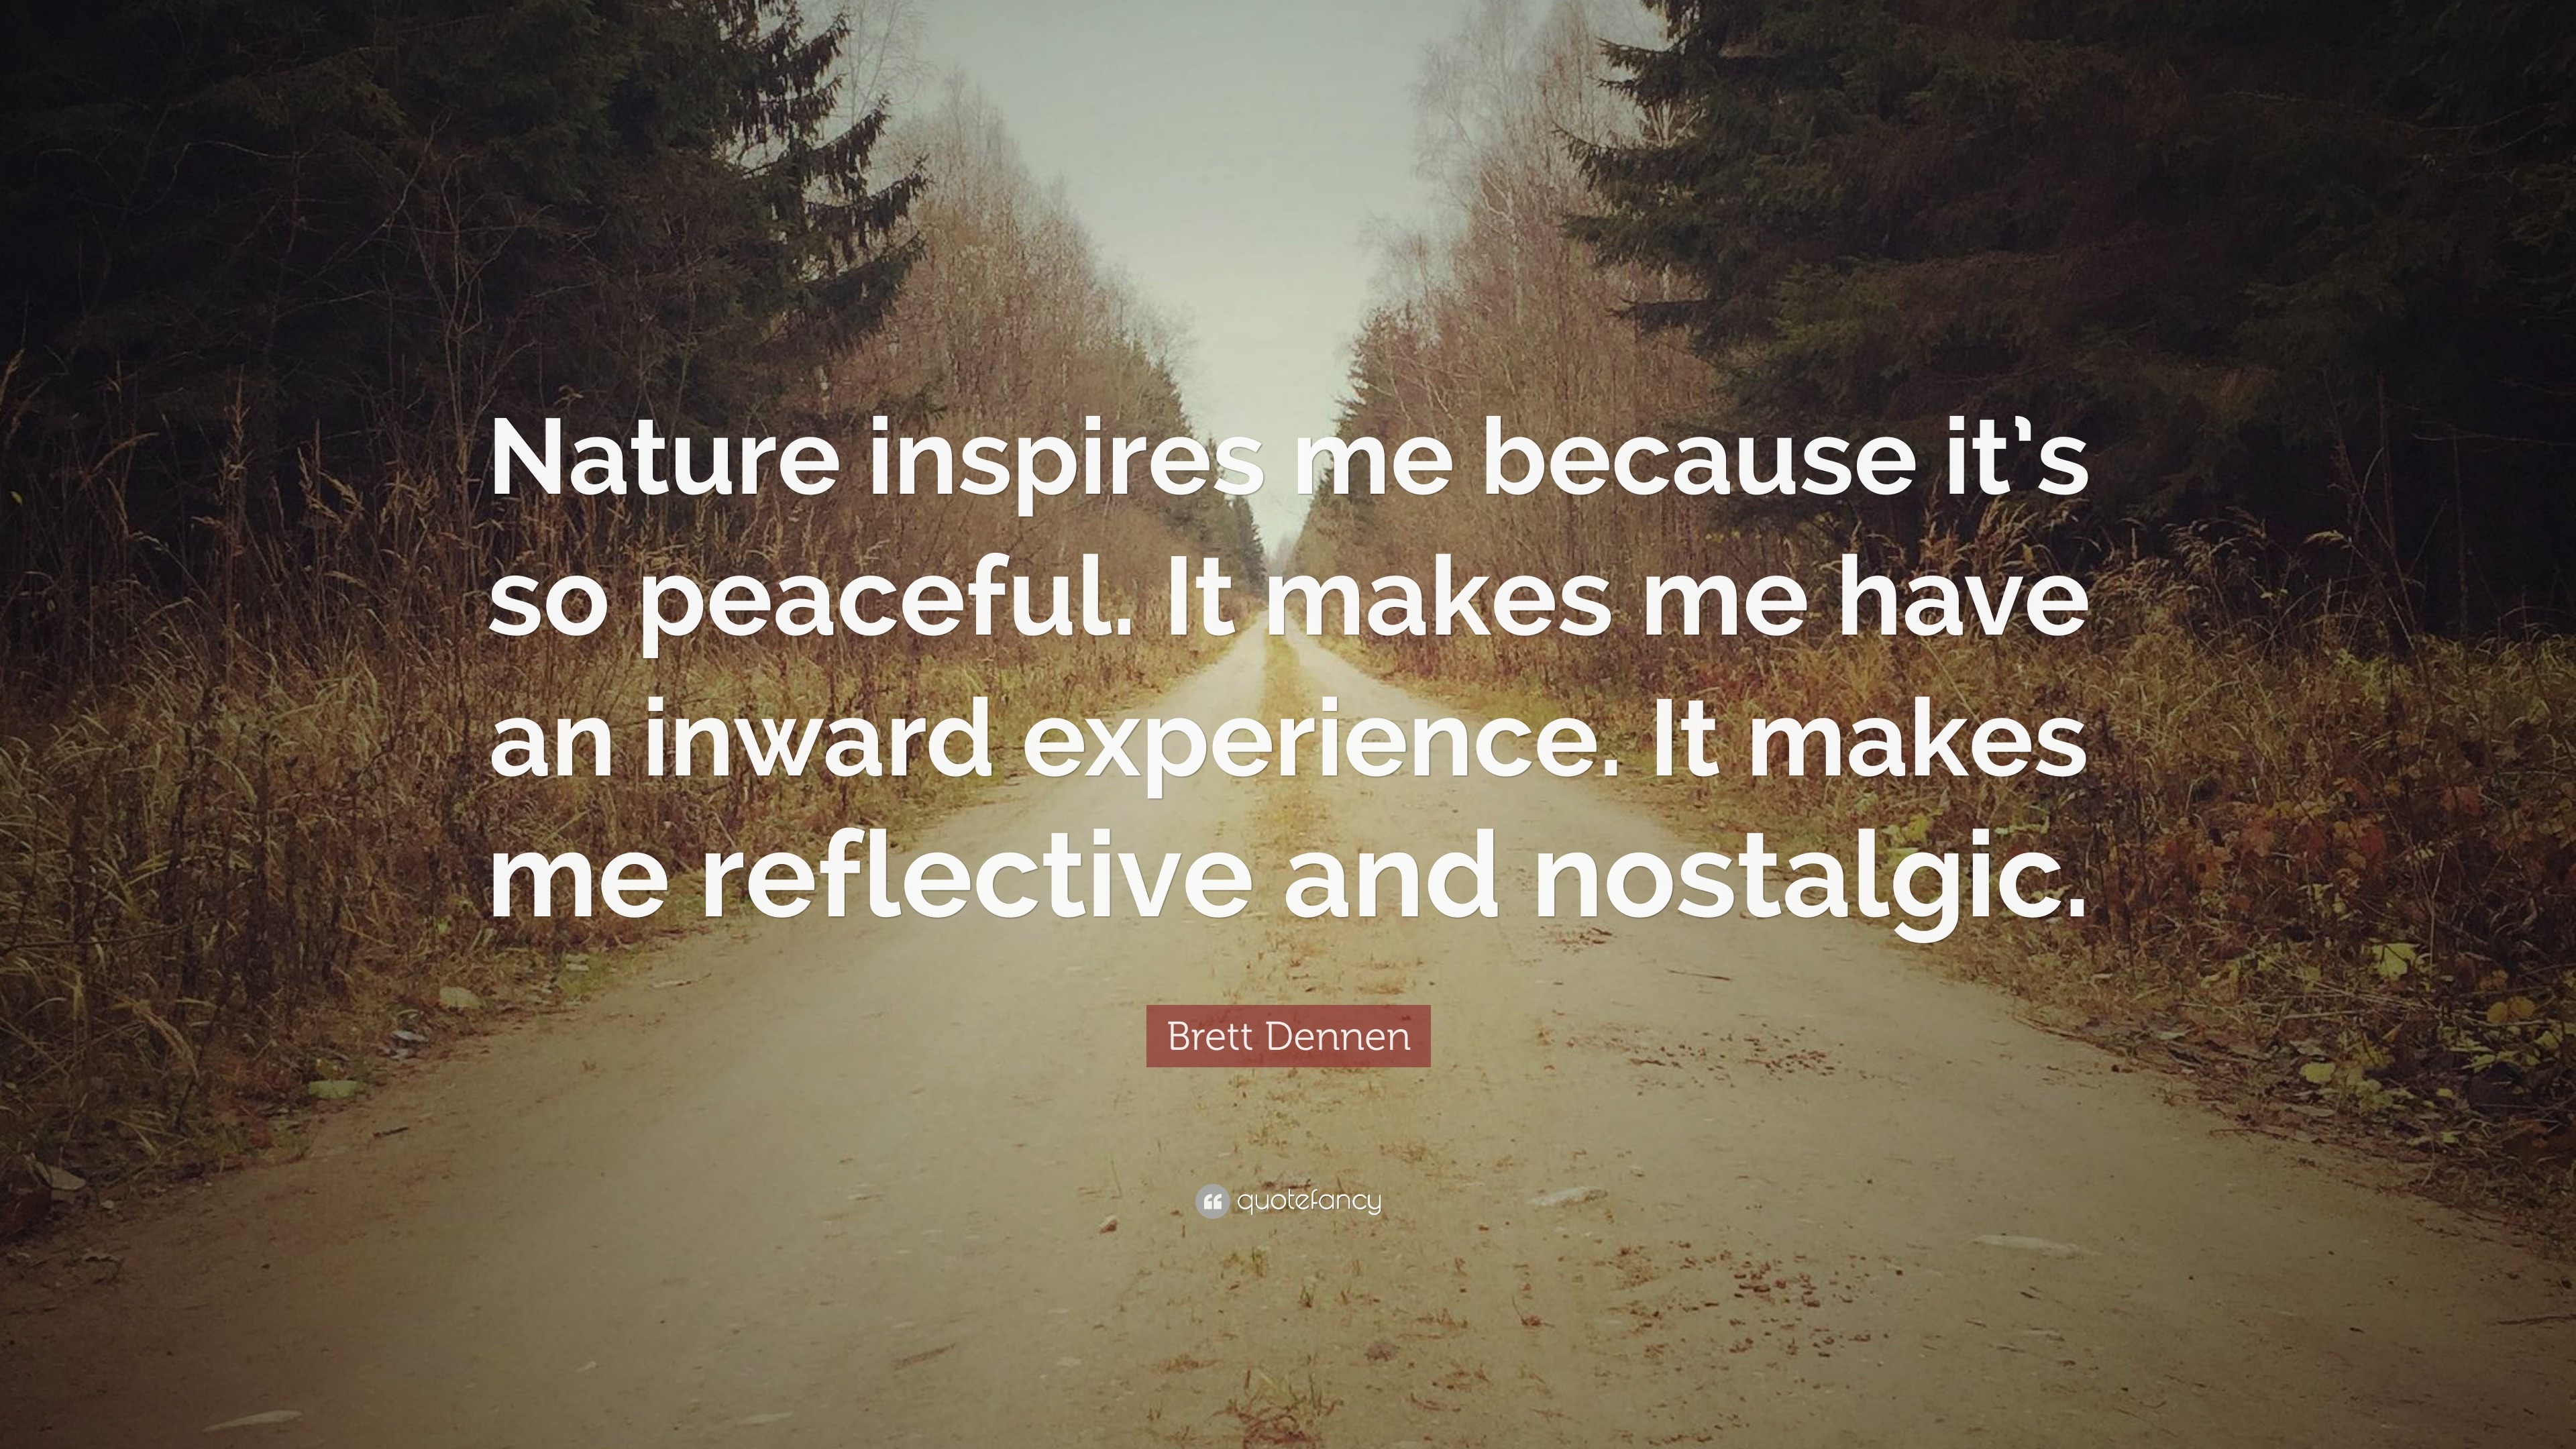 Brett Dennen Quote: “Nature inspires me because it’s so peaceful. It ...